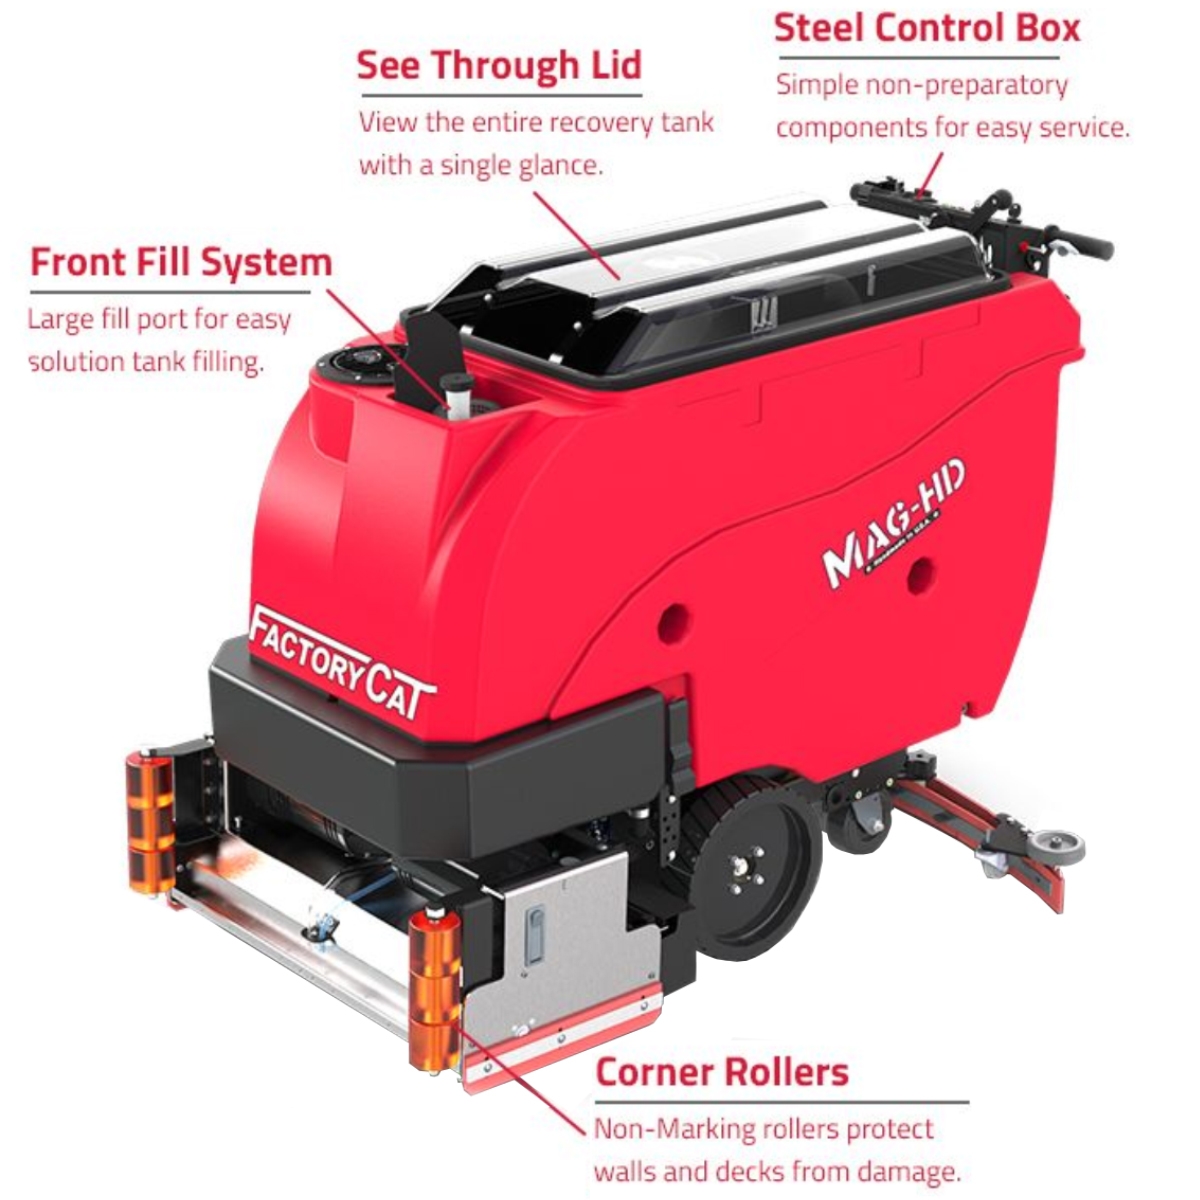 Mag-HD Walk Behind Floor Scrubber
Cleaning Path: 29-34 | Run Time: Up To 5.0 Hours | Tank Capacity: Sol: 35 Gal, Rec: 37 Gal